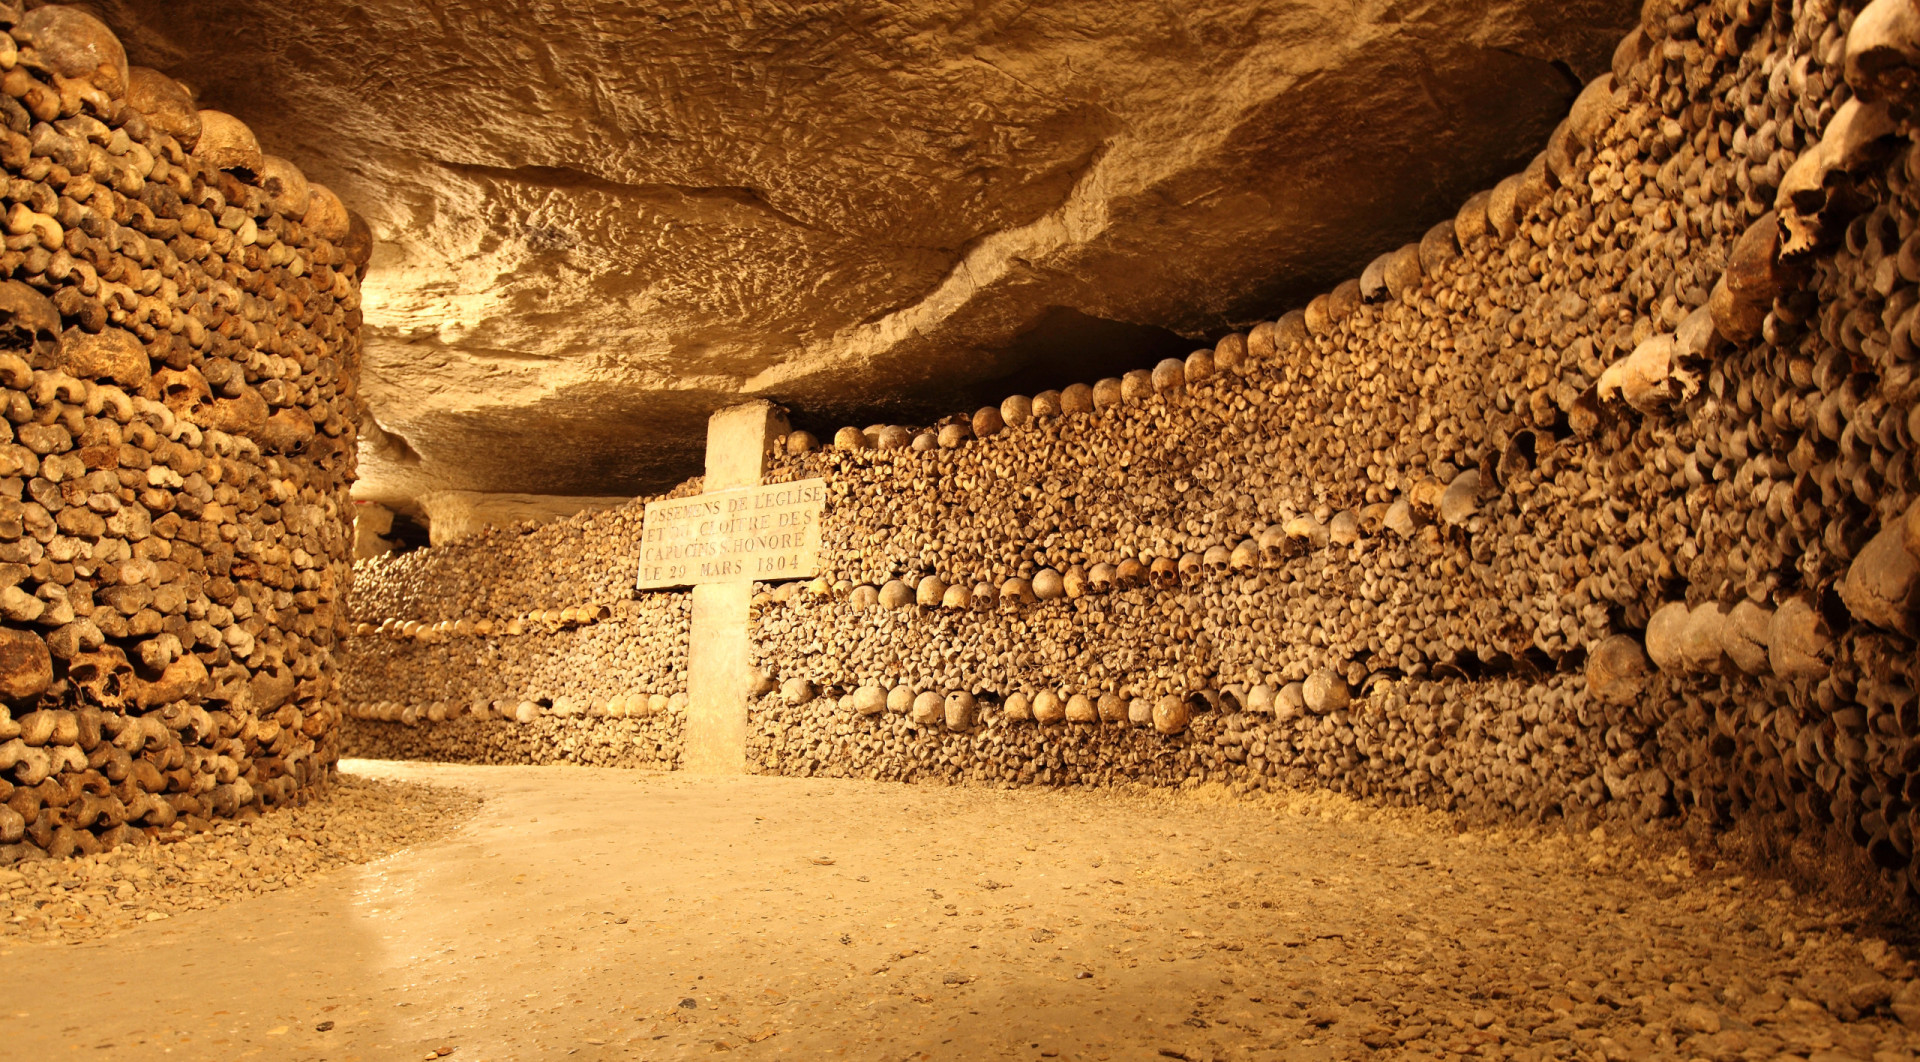 <p>This famous subterranean labyrinth, rich in history, will be closed for essential maintenance and infrastructure upgrades. These improvements are necessary to preserve the integrity of the catacombs, ensuring the safety and enhanced experience for future visitors to this unique historical site.</p> <p>Sources: (CNN) (Jasmine Alley) </p> <p>See also: <a href="https://www.starsinsider.com/travel/636762/the-worlds-top-places-to-visit-in-2024">The world's top places to visit in 2024</a></p><p><a href="https://www.msn.com/en-us/community/channel/vid-7xx8mnucu55yw63we9va2gwr7uihbxwc68fxqp25x6tg4ftibpra?cvid=94631541bc0f4f89bfd59158d696ad7e">Follow us and access great exclusive content every day</a></p>